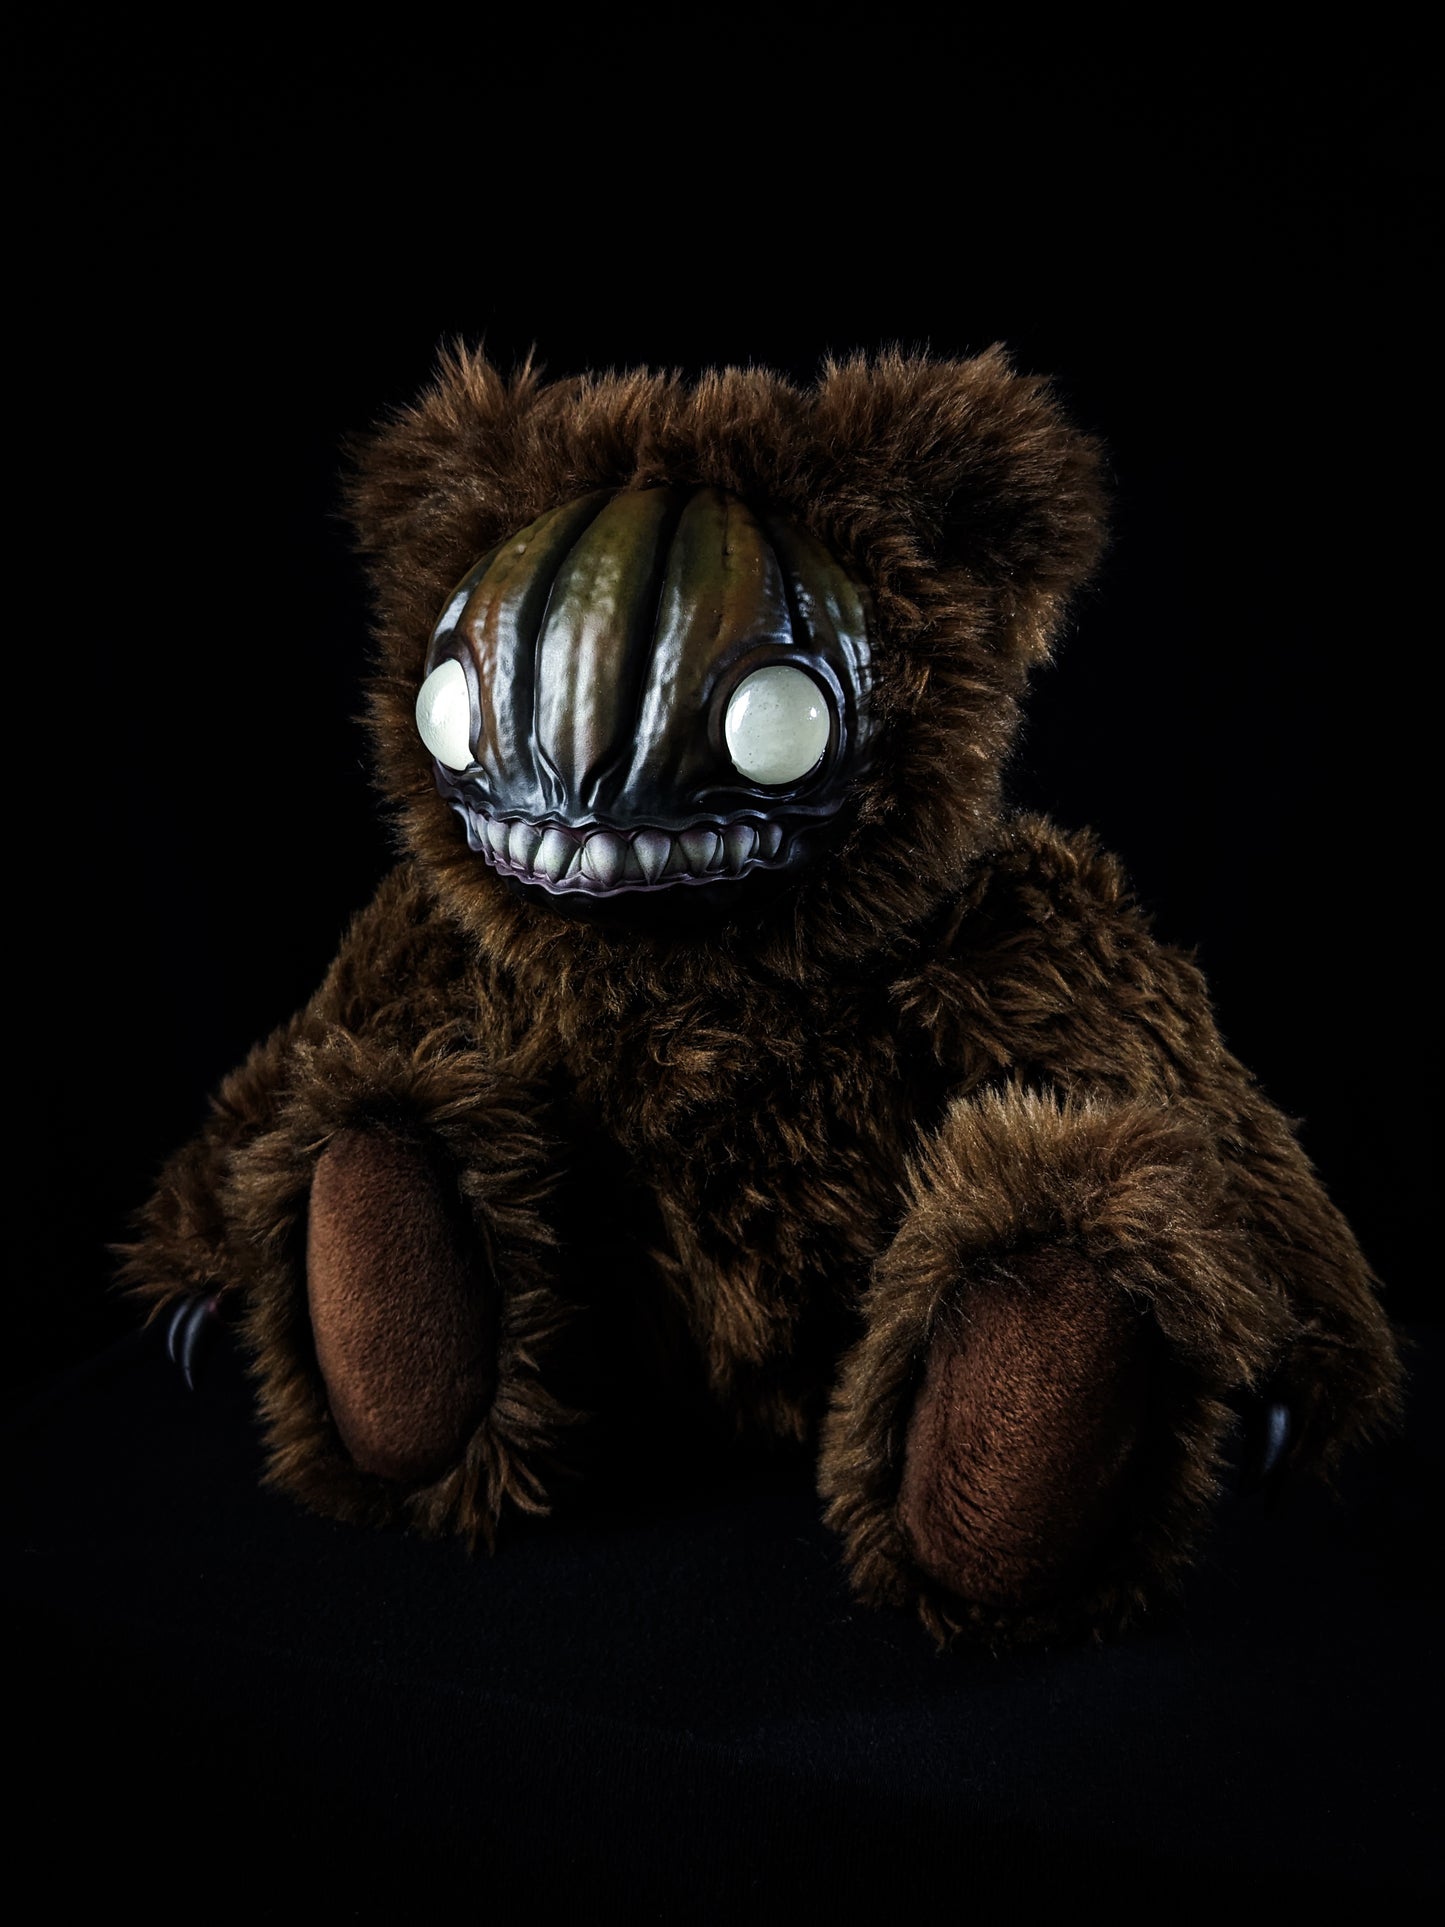 Overripe Ripper: HAUNTVESTER - CRYPTCRITZ Handcrafted Creepy Cute Halloween Pumpkin Art Doll Plush Toy for Spooky Souls